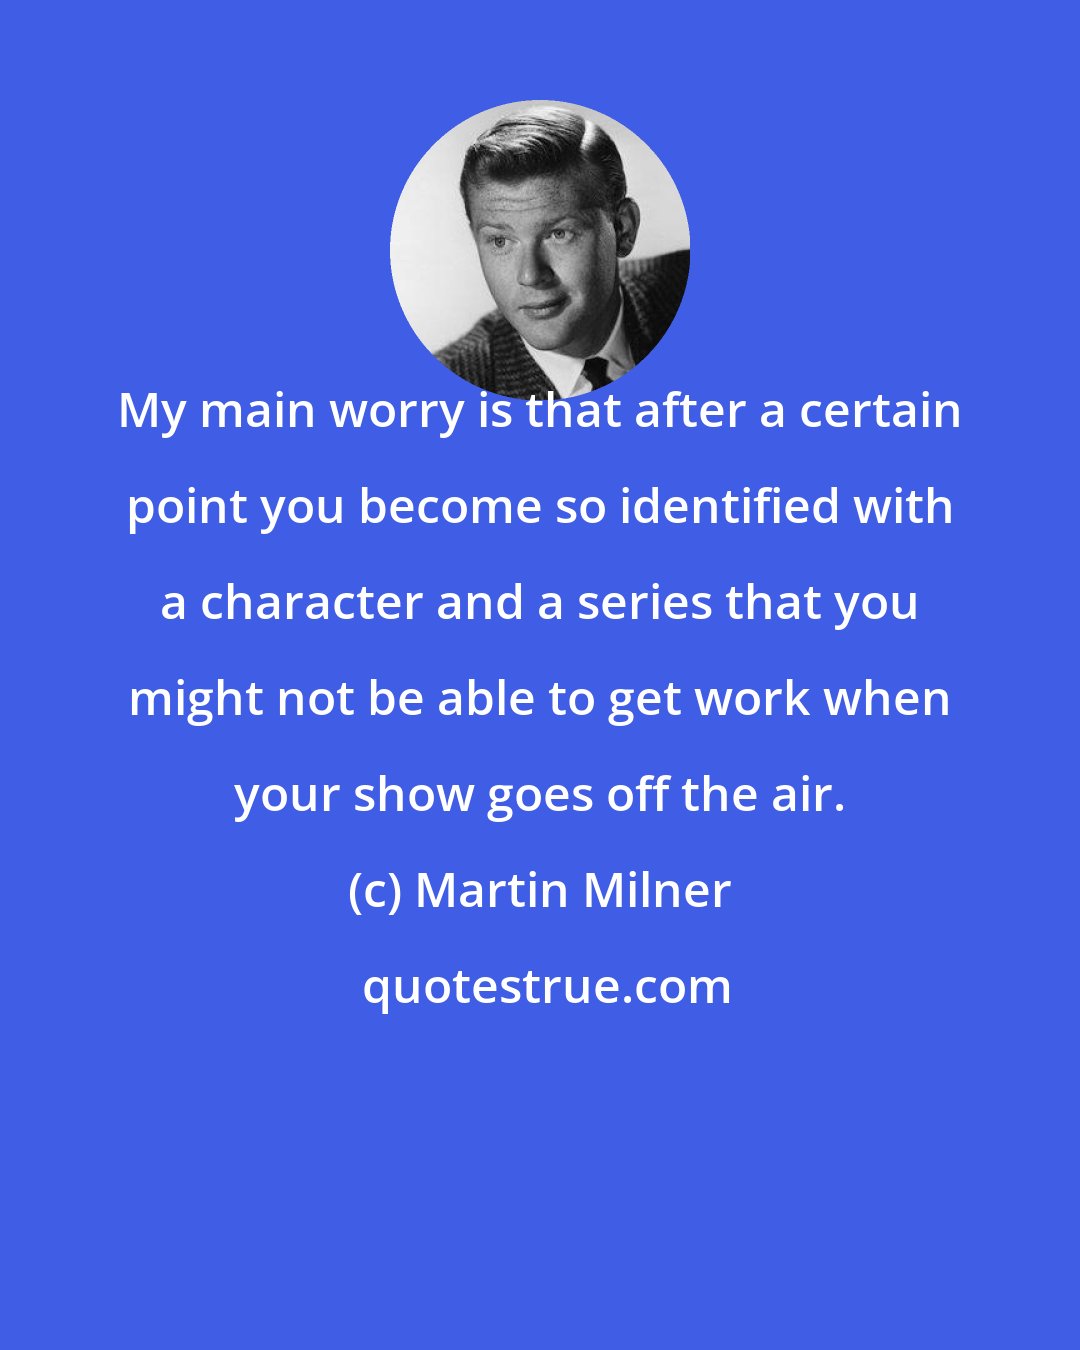 Martin Milner: My main worry is that after a certain point you become so identified with a character and a series that you might not be able to get work when your show goes off the air.